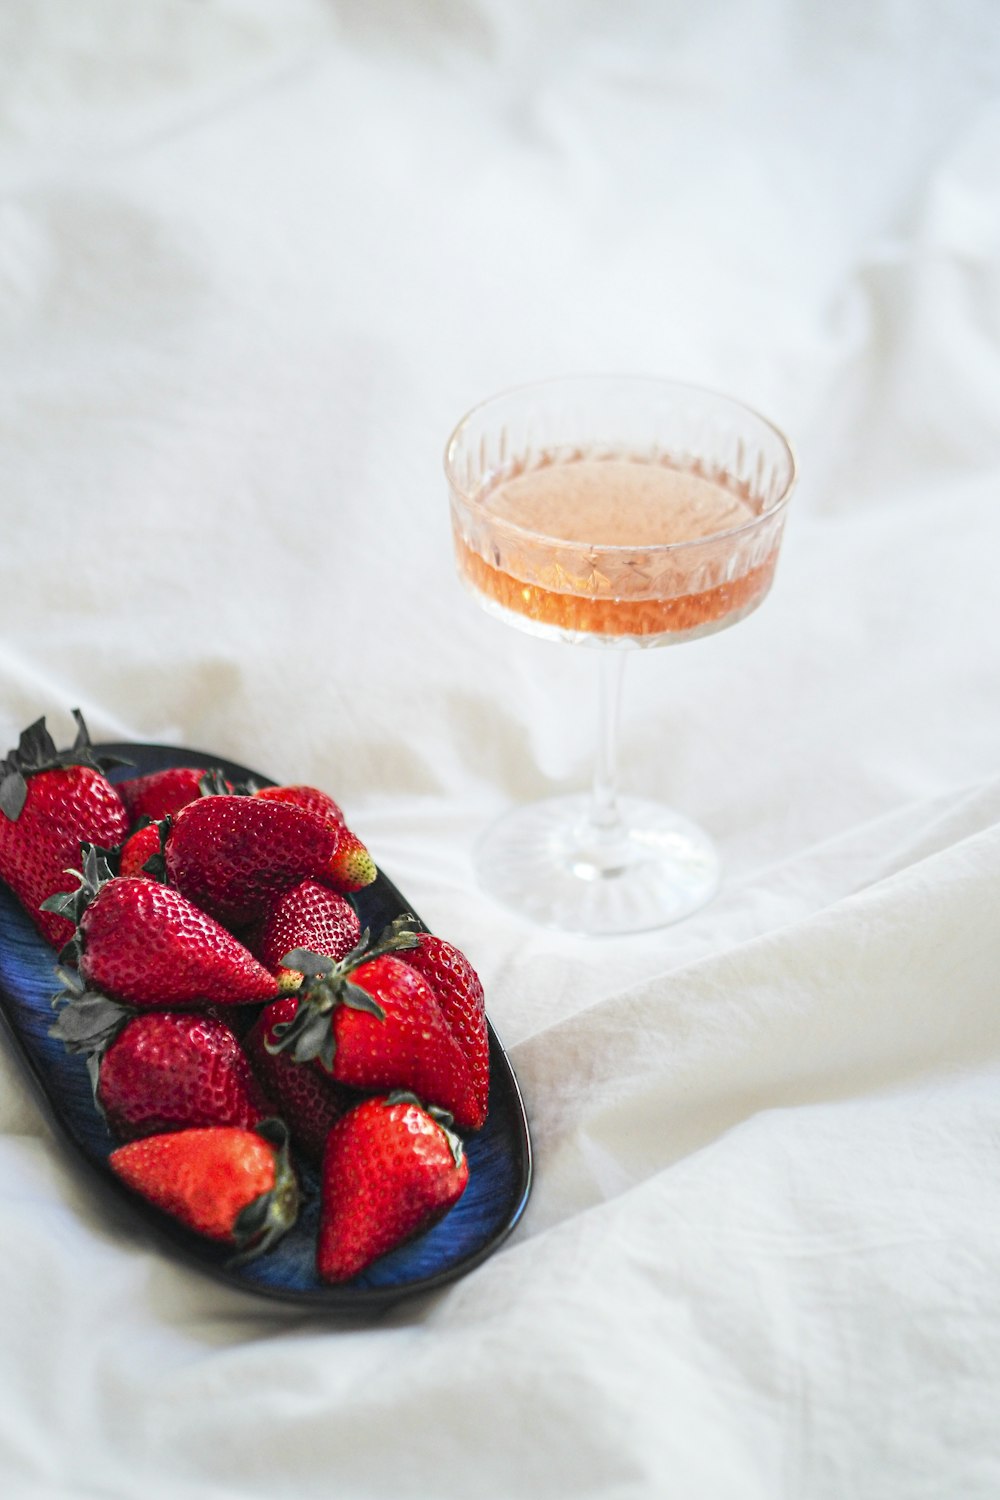 a plate of strawberries next to a glass of wine